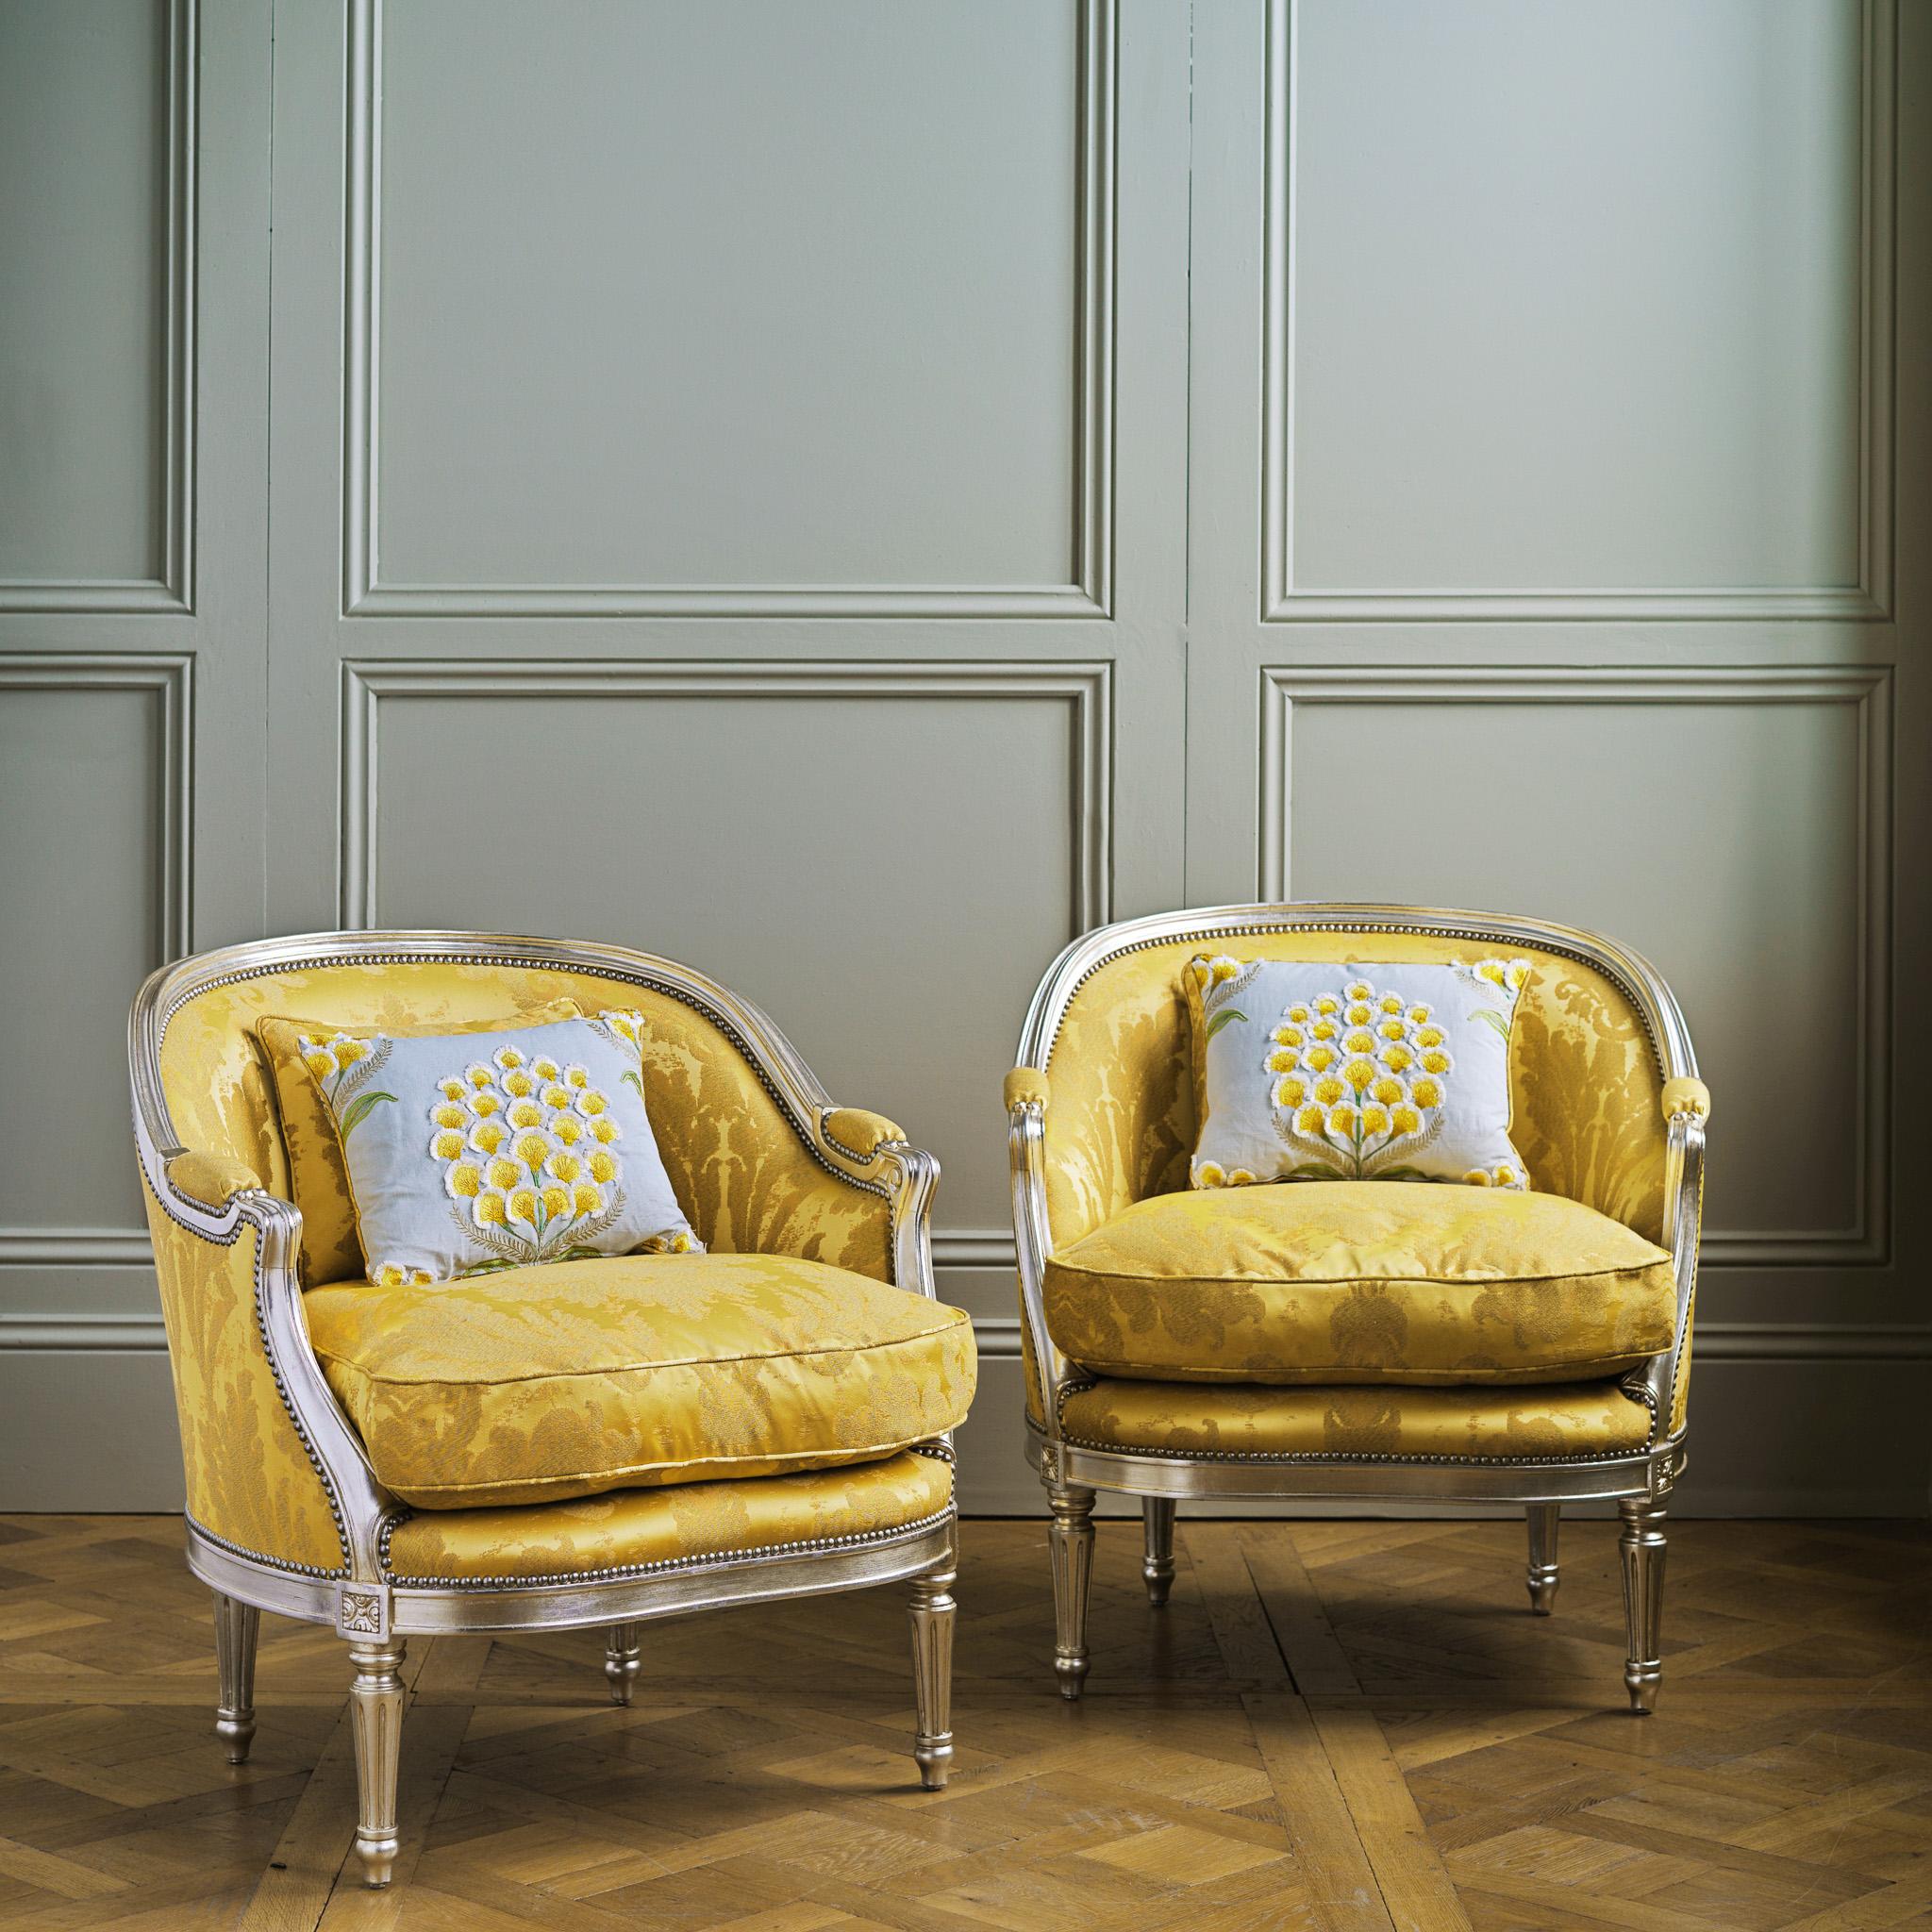 A Silver Gilt Wood Hollywood Regency Style Marquise Armchair In New Condition For Sale In London, Park Royal